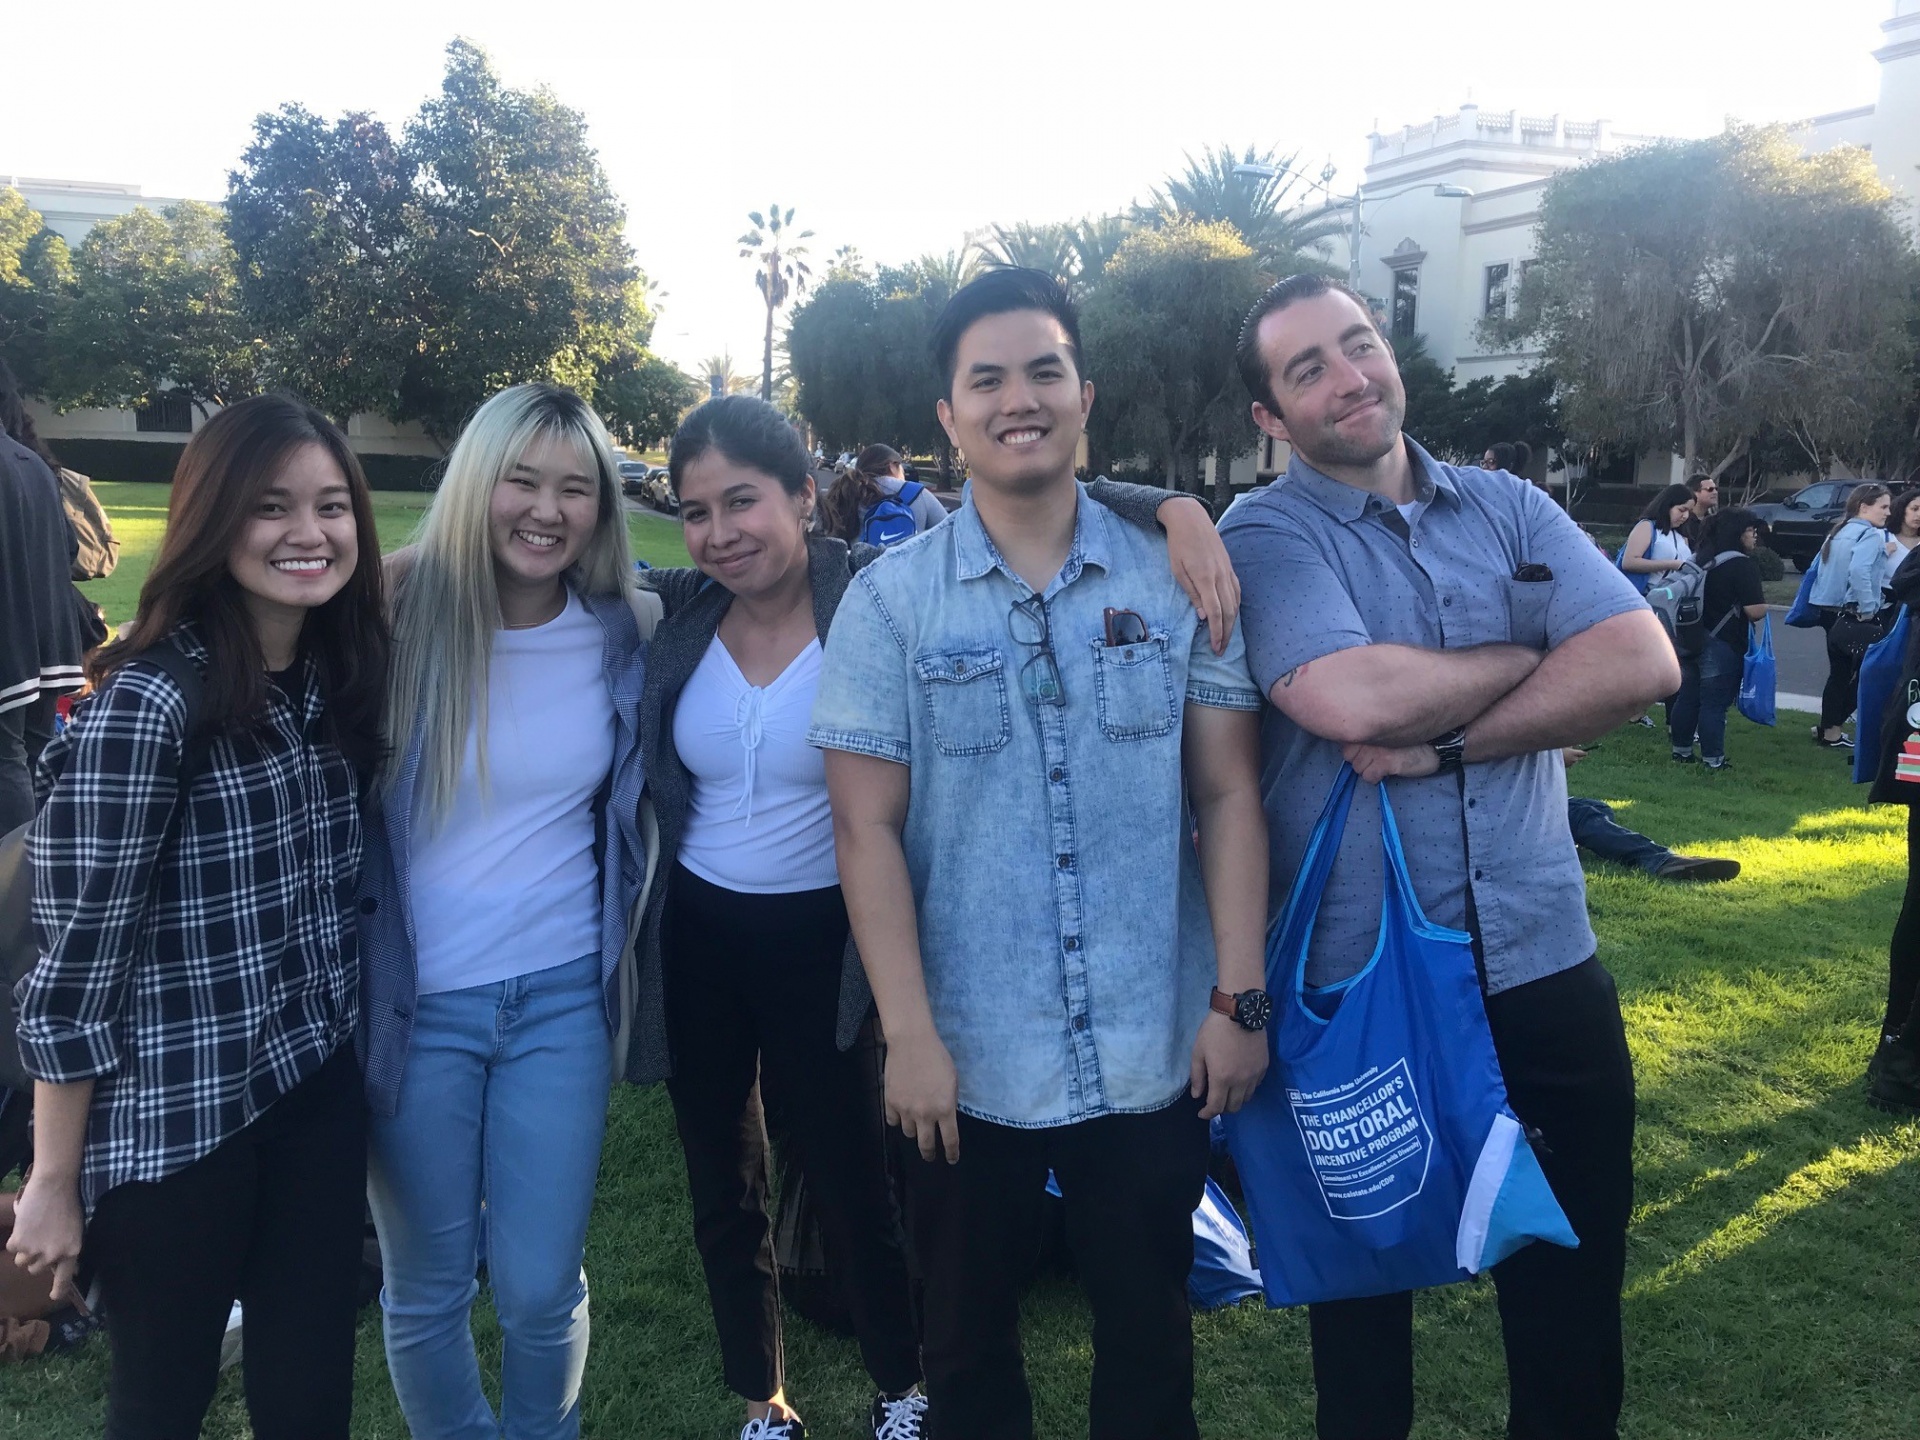 2. Students at Diveristy Forum in San Diego 2018